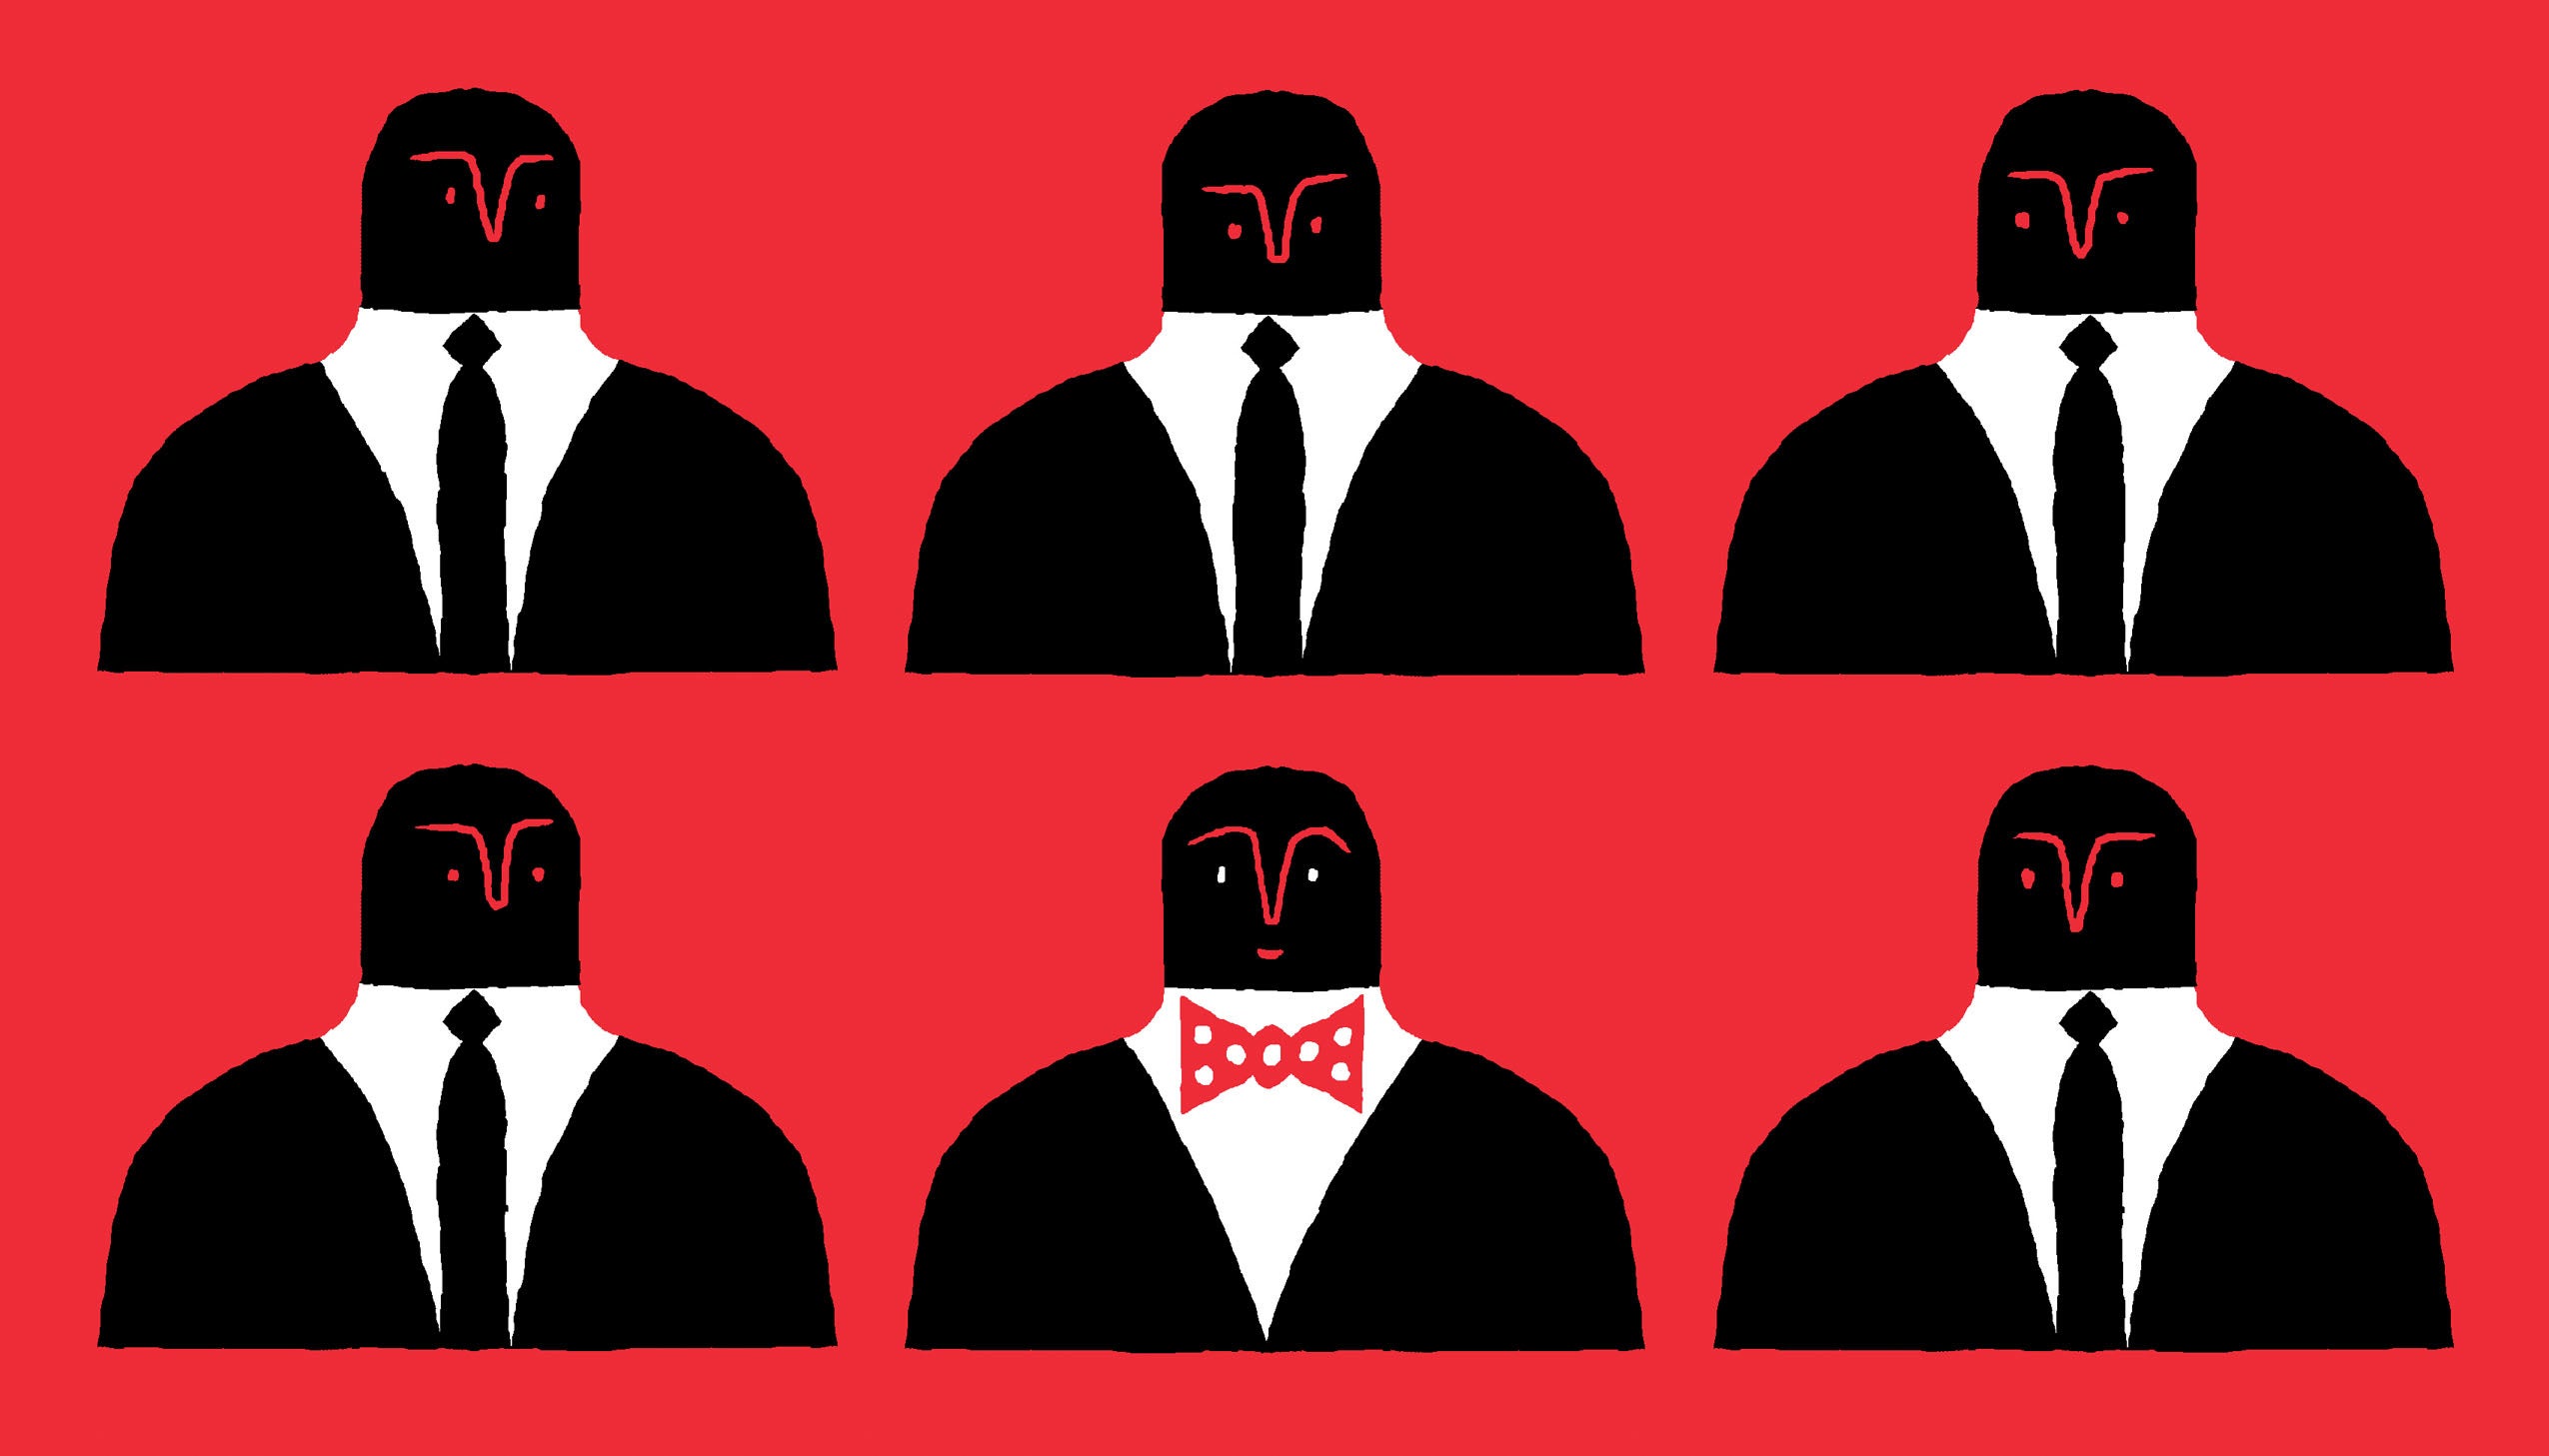 Illustration of two rows of three people in suits, one person in the middle of the second row with a bowtie